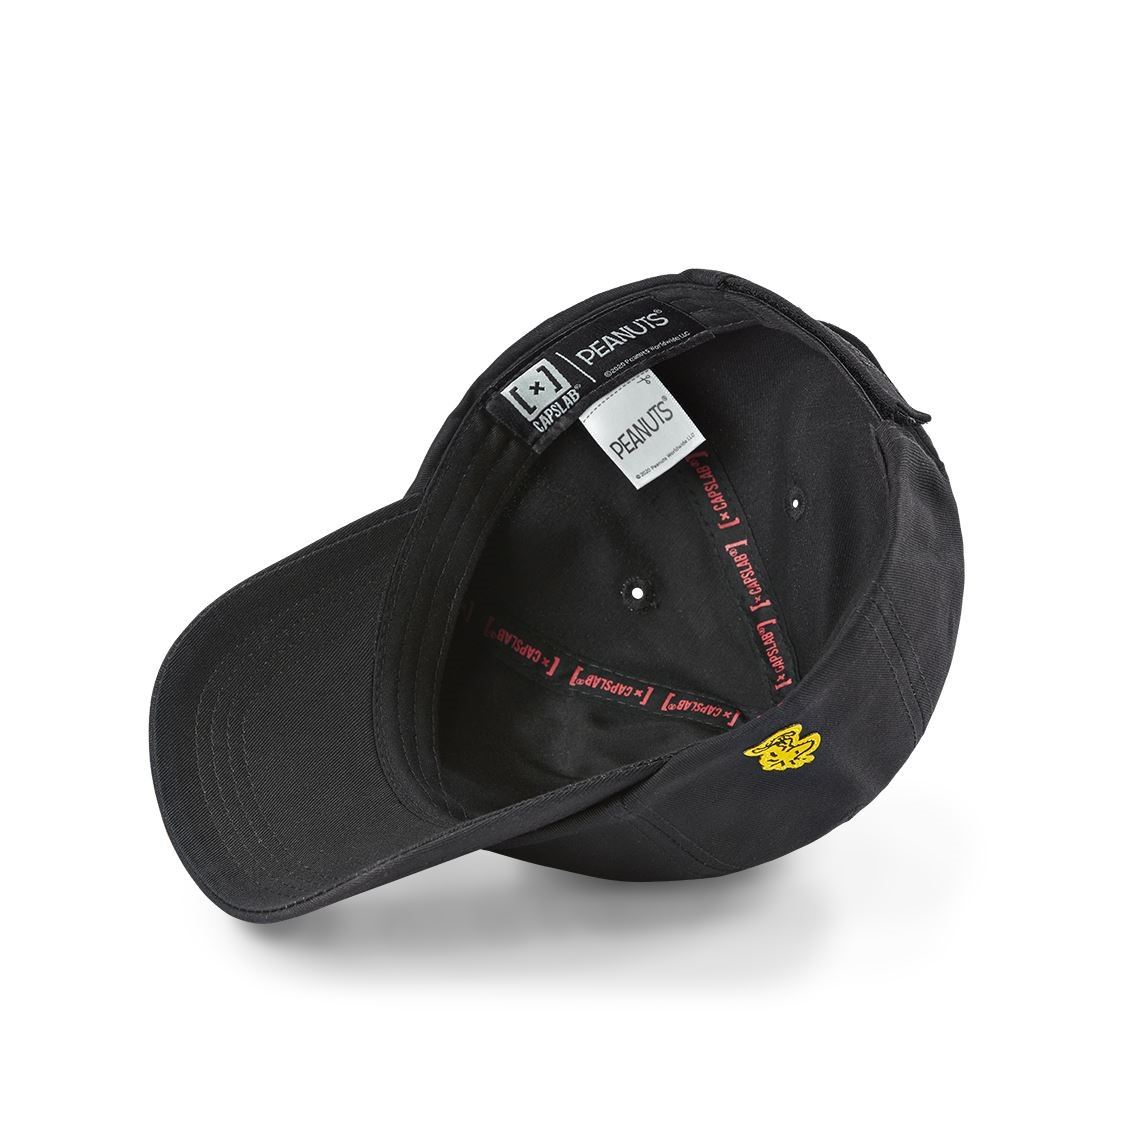 Snoopy The Peanuts Black Curved Unstructured Strapback Cap Capslab